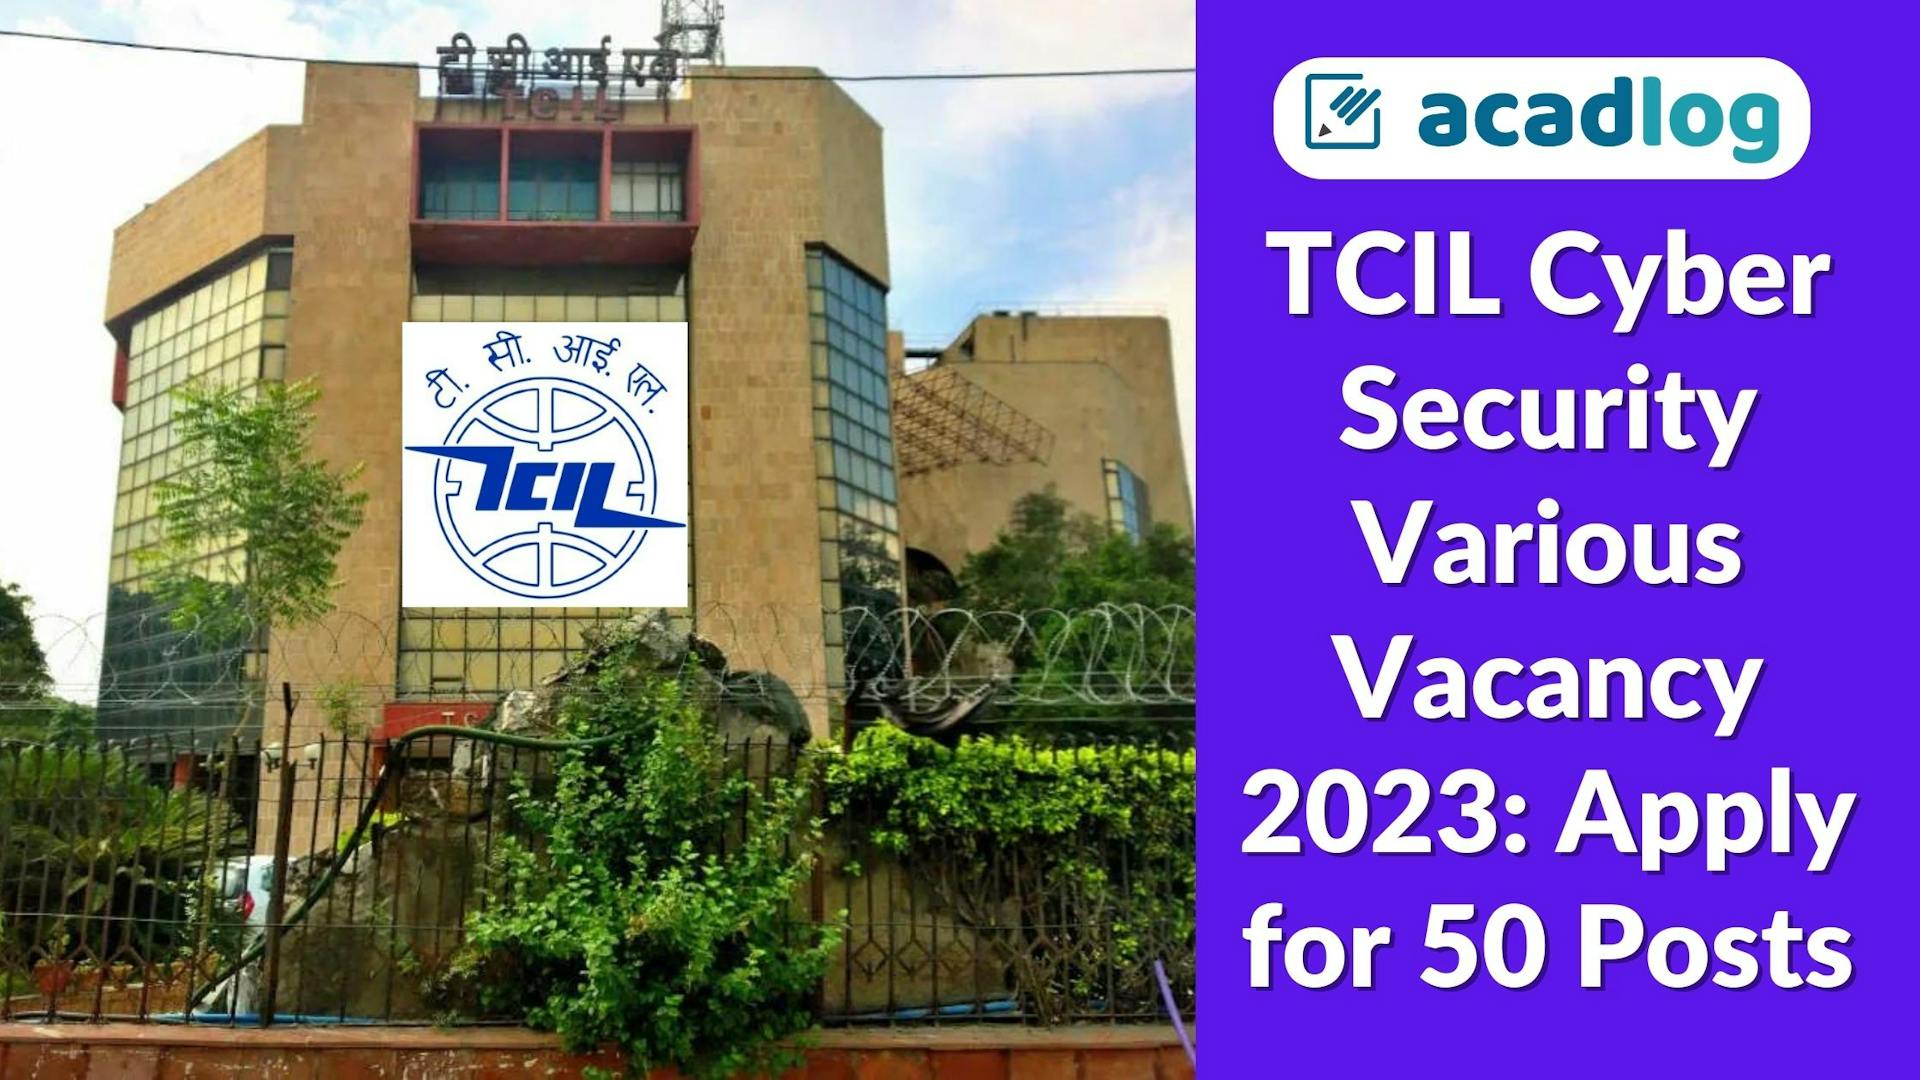 TCIL Cyber Security Various Vacancy 2023: Apply for 50 Posts